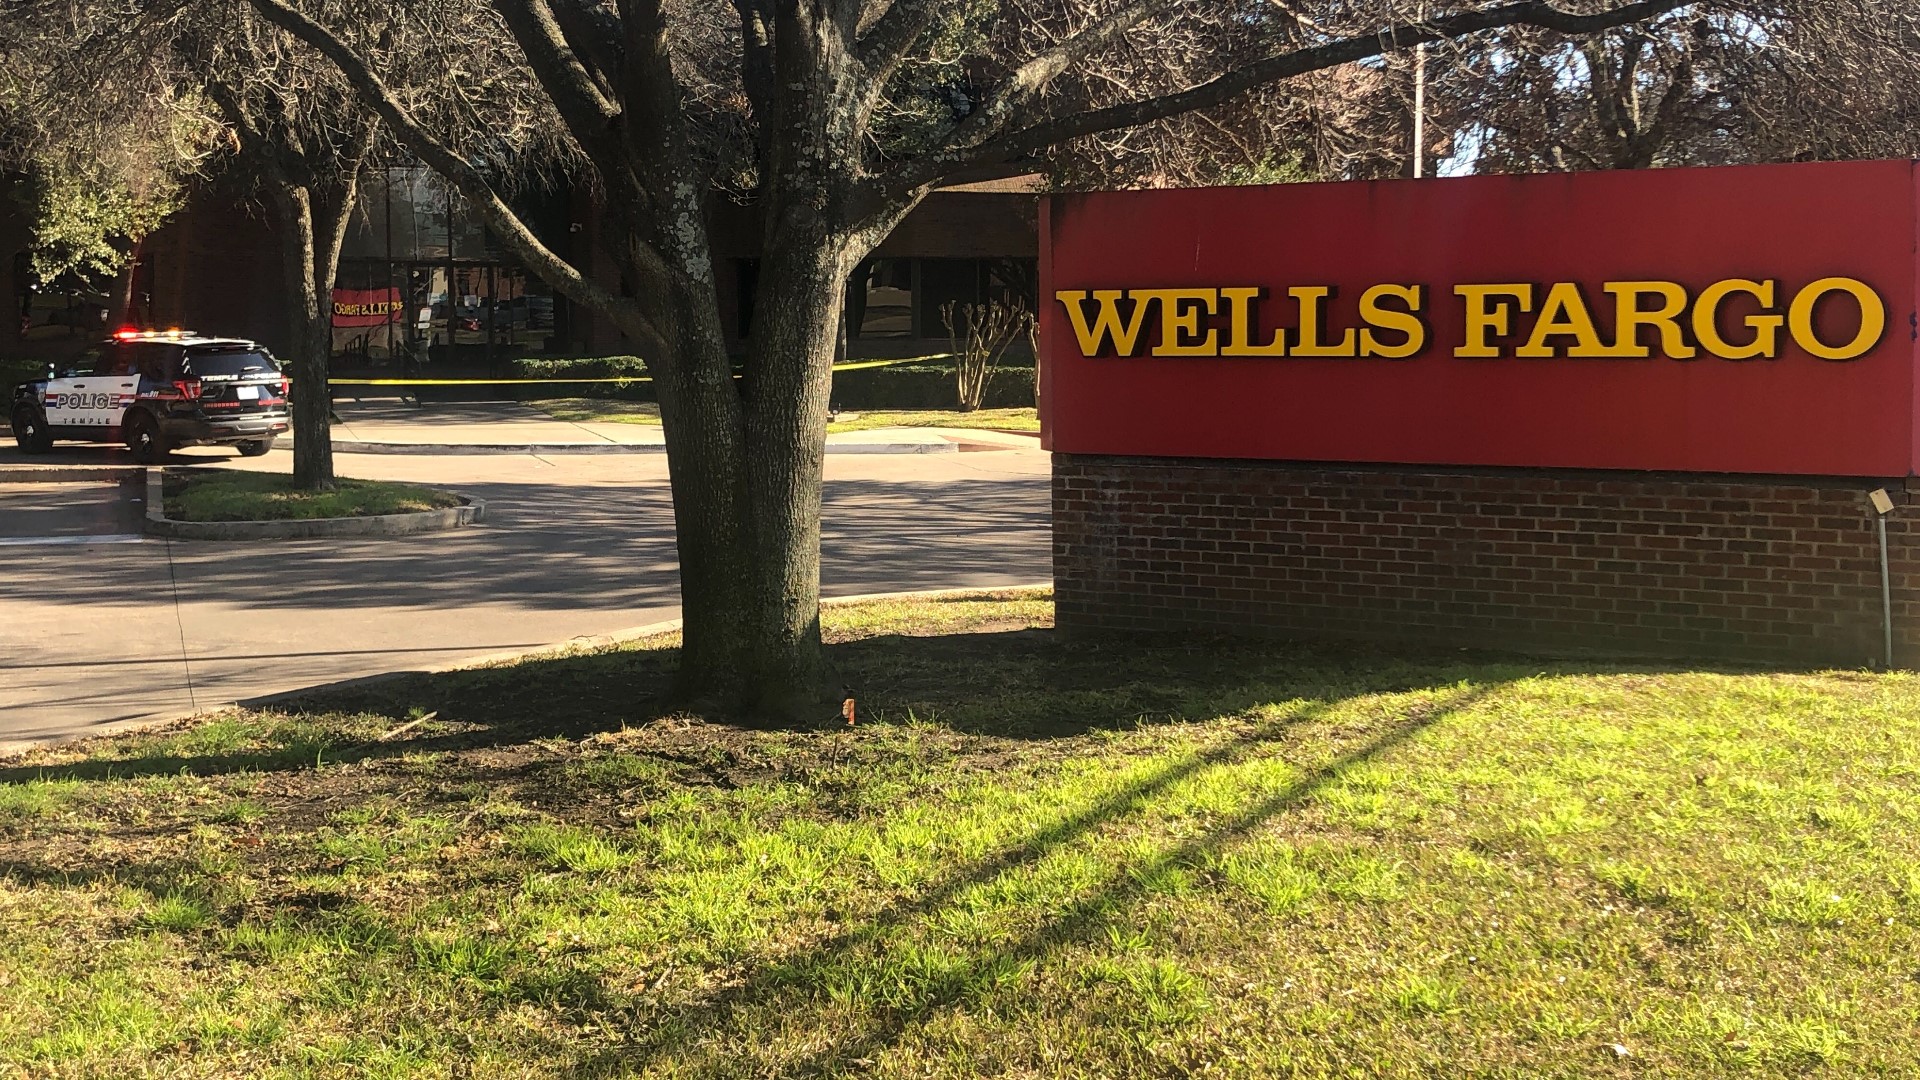 Temple police are searching for a suspect who robbed a Wells Fargo bank around 3 p.m. Wednesday